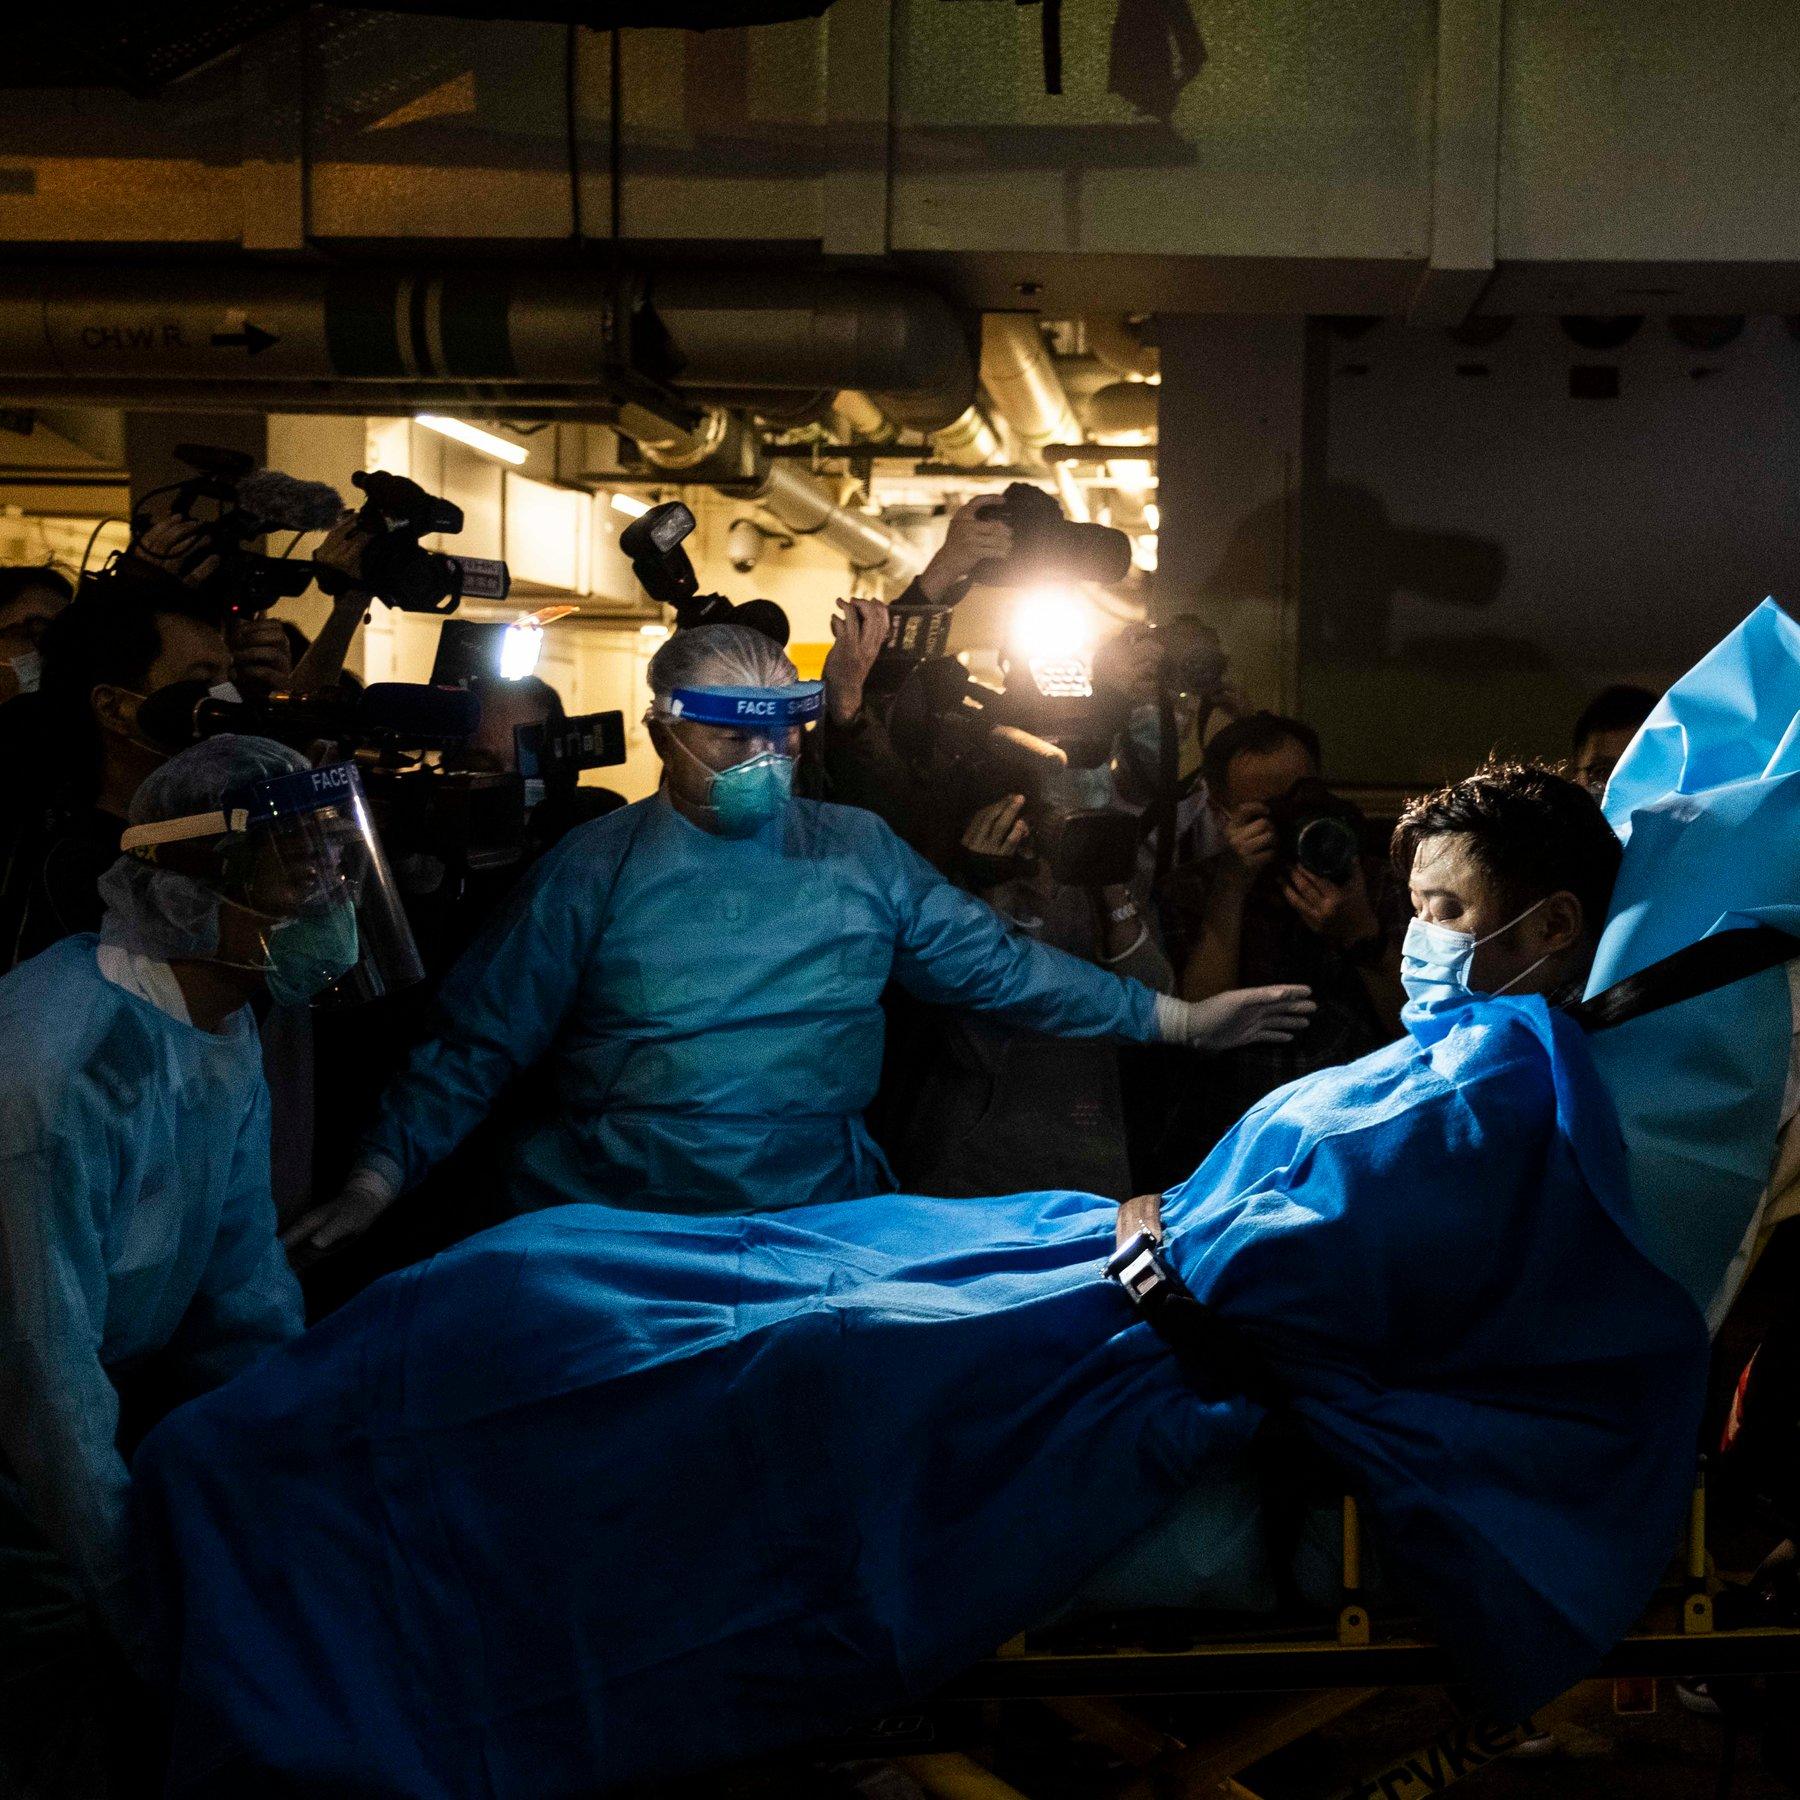 China's Battle With a Deadly Coronavirus, in Photo